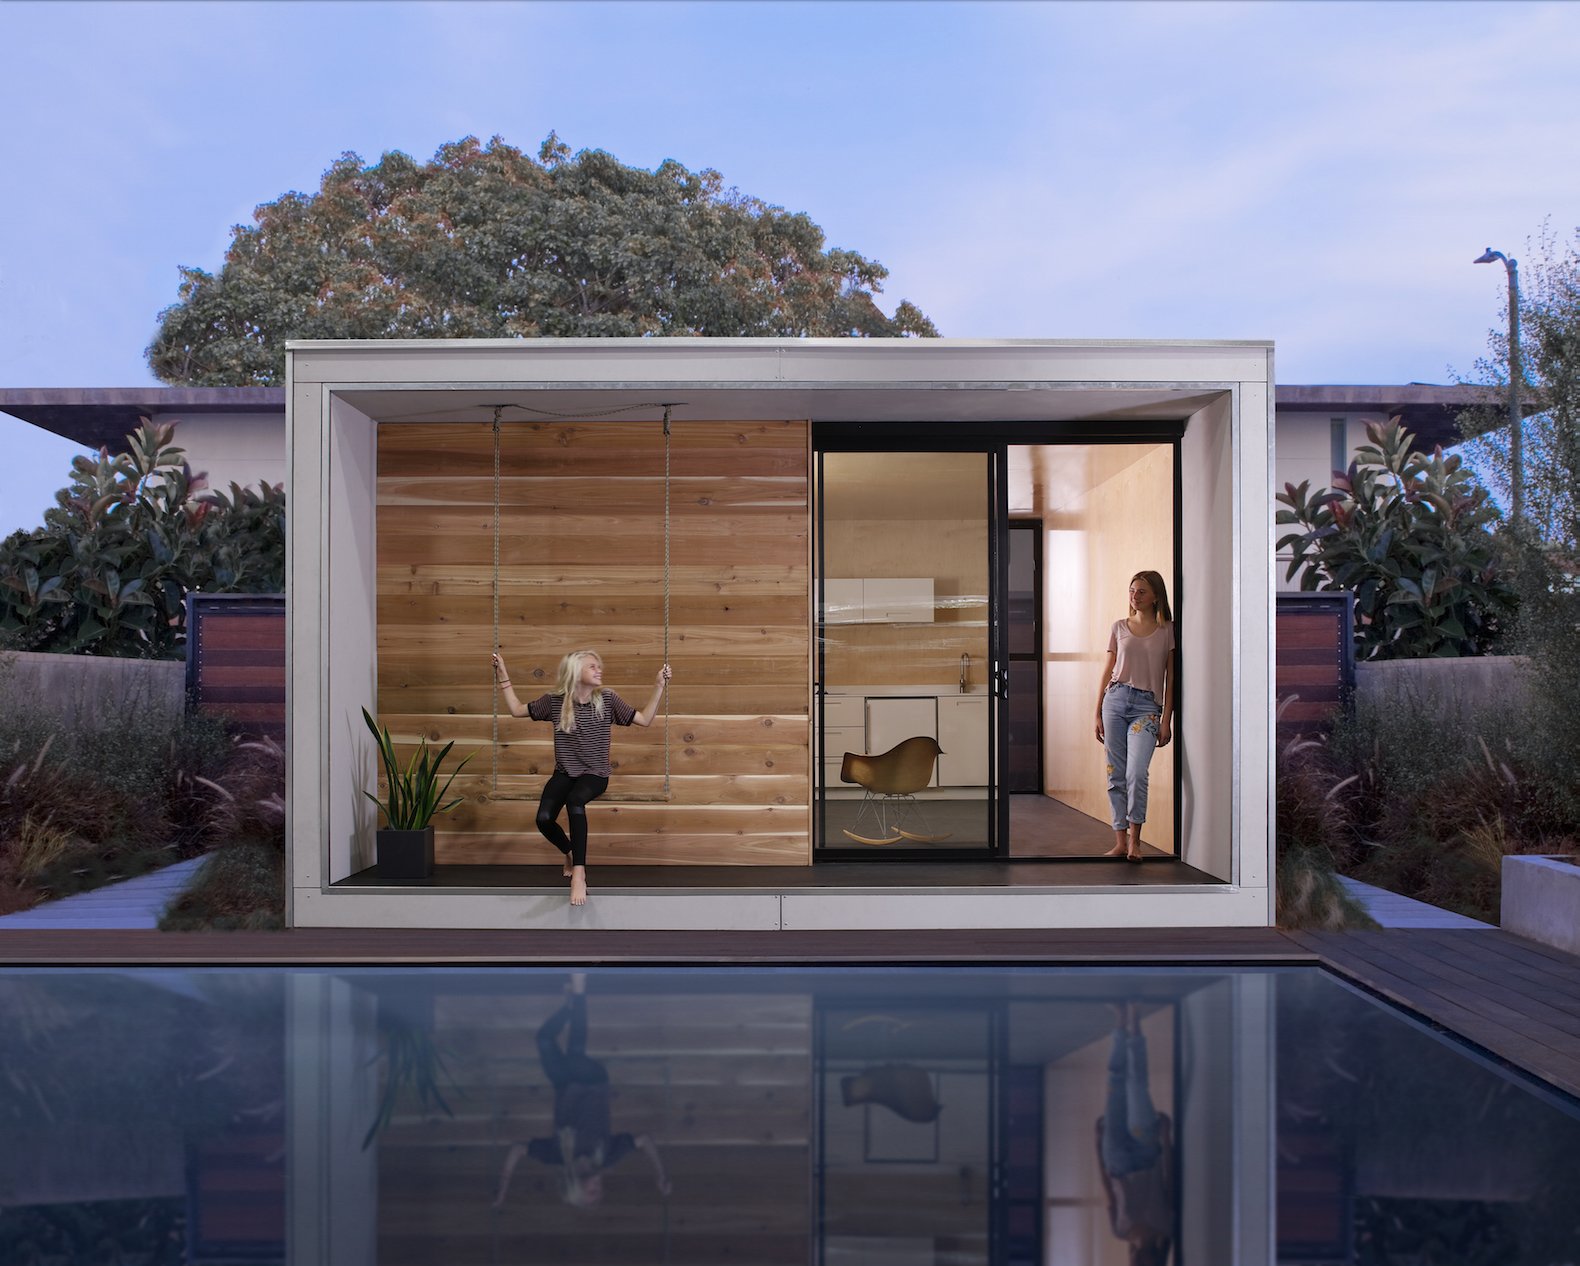 This Tiny, Icelandic-Inspired Prefab Could Ease the Housing Shortage in Los Angeles